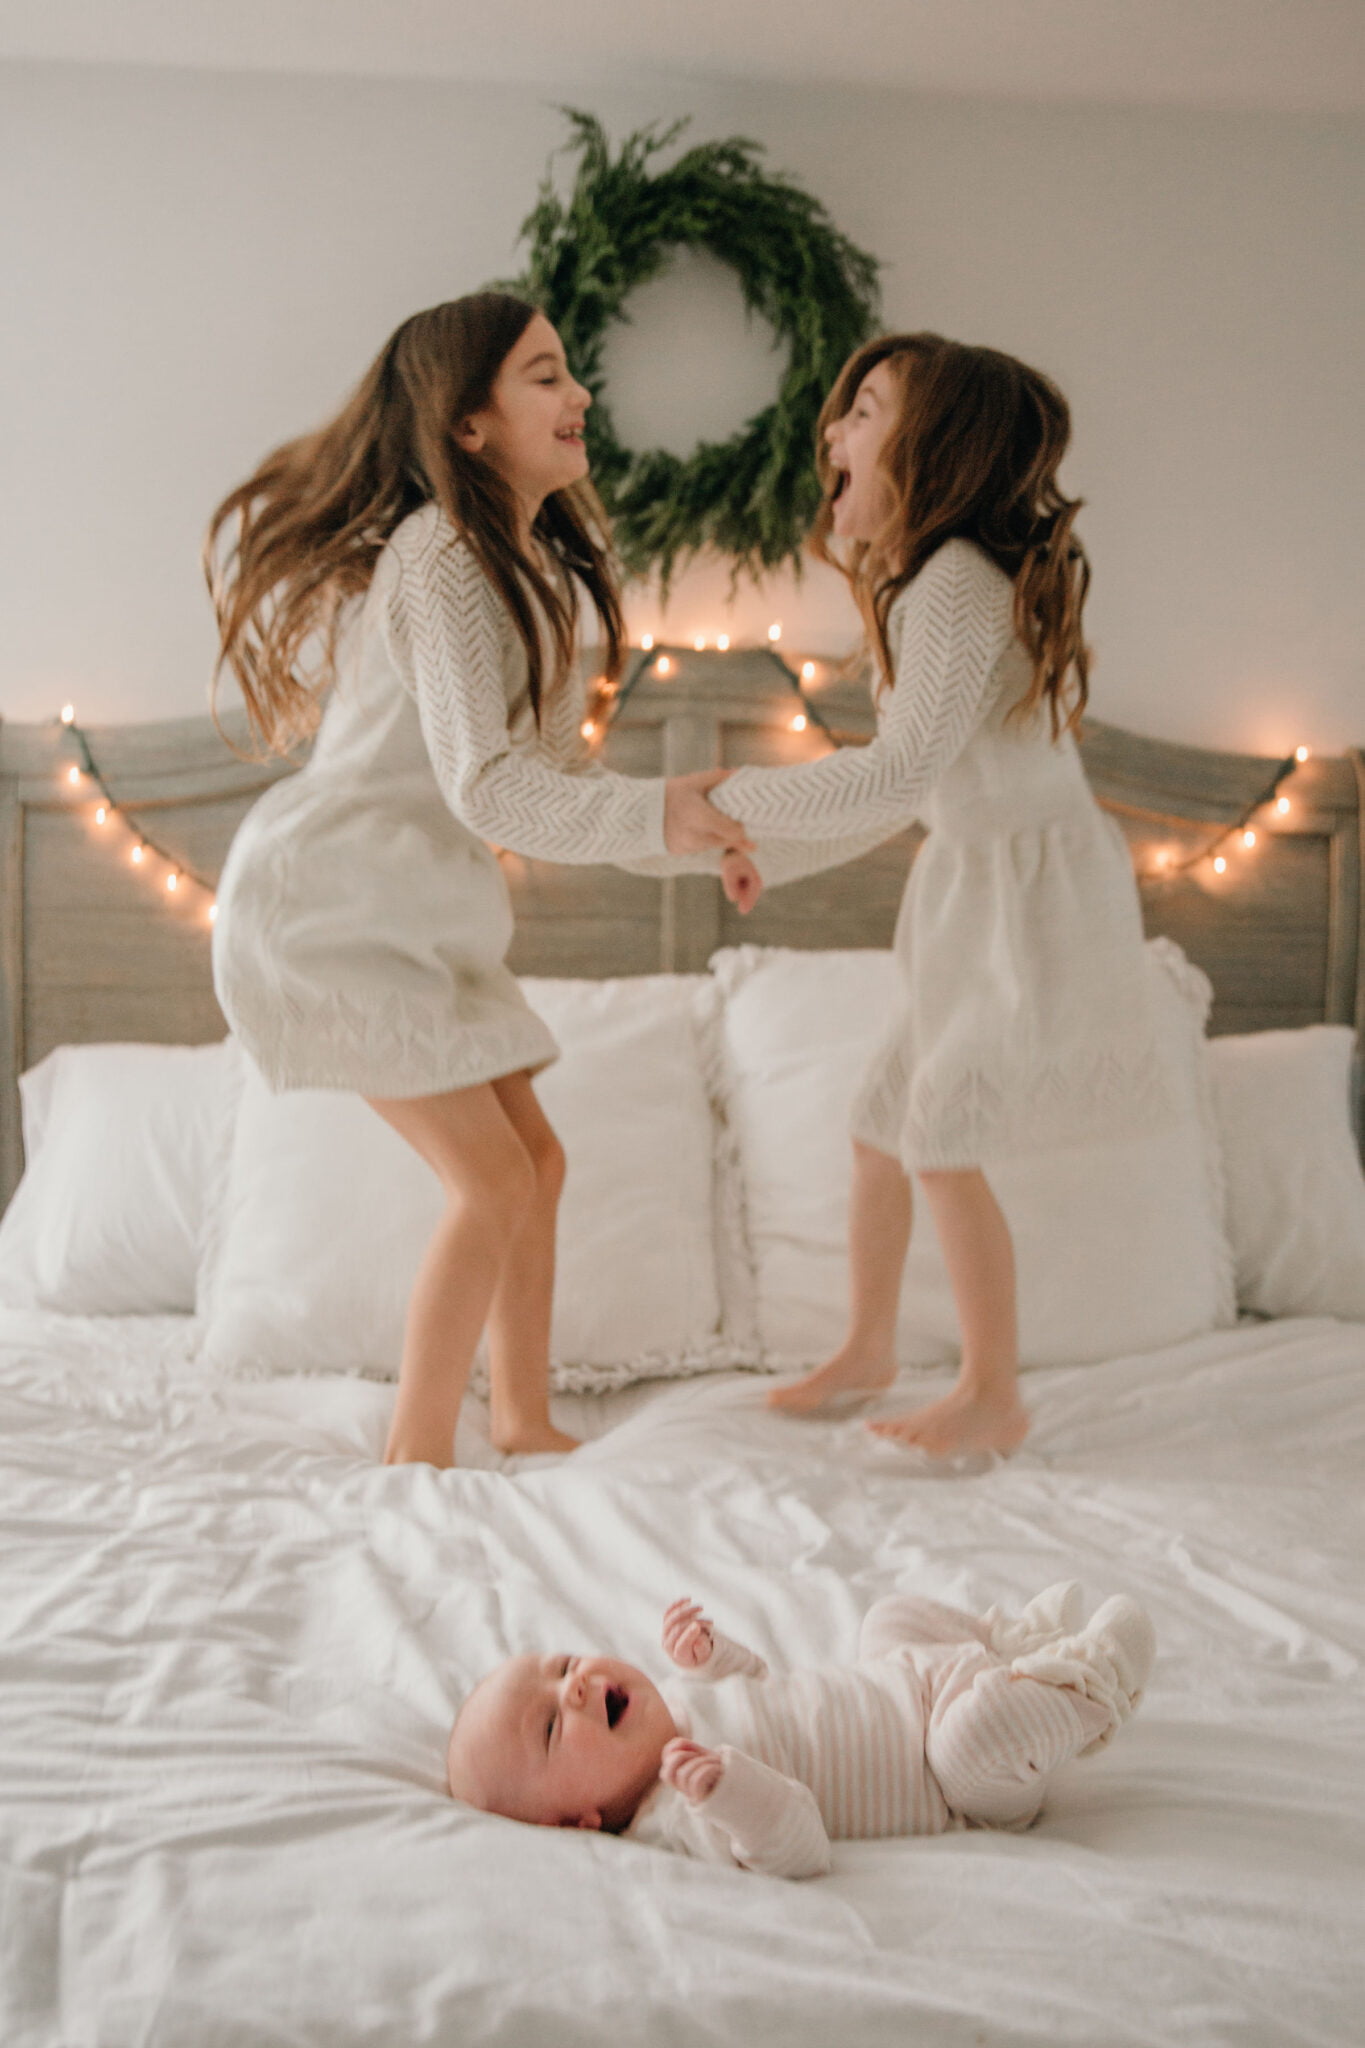 Parents of 3 kids - big sisters jumping on bed with baby sister